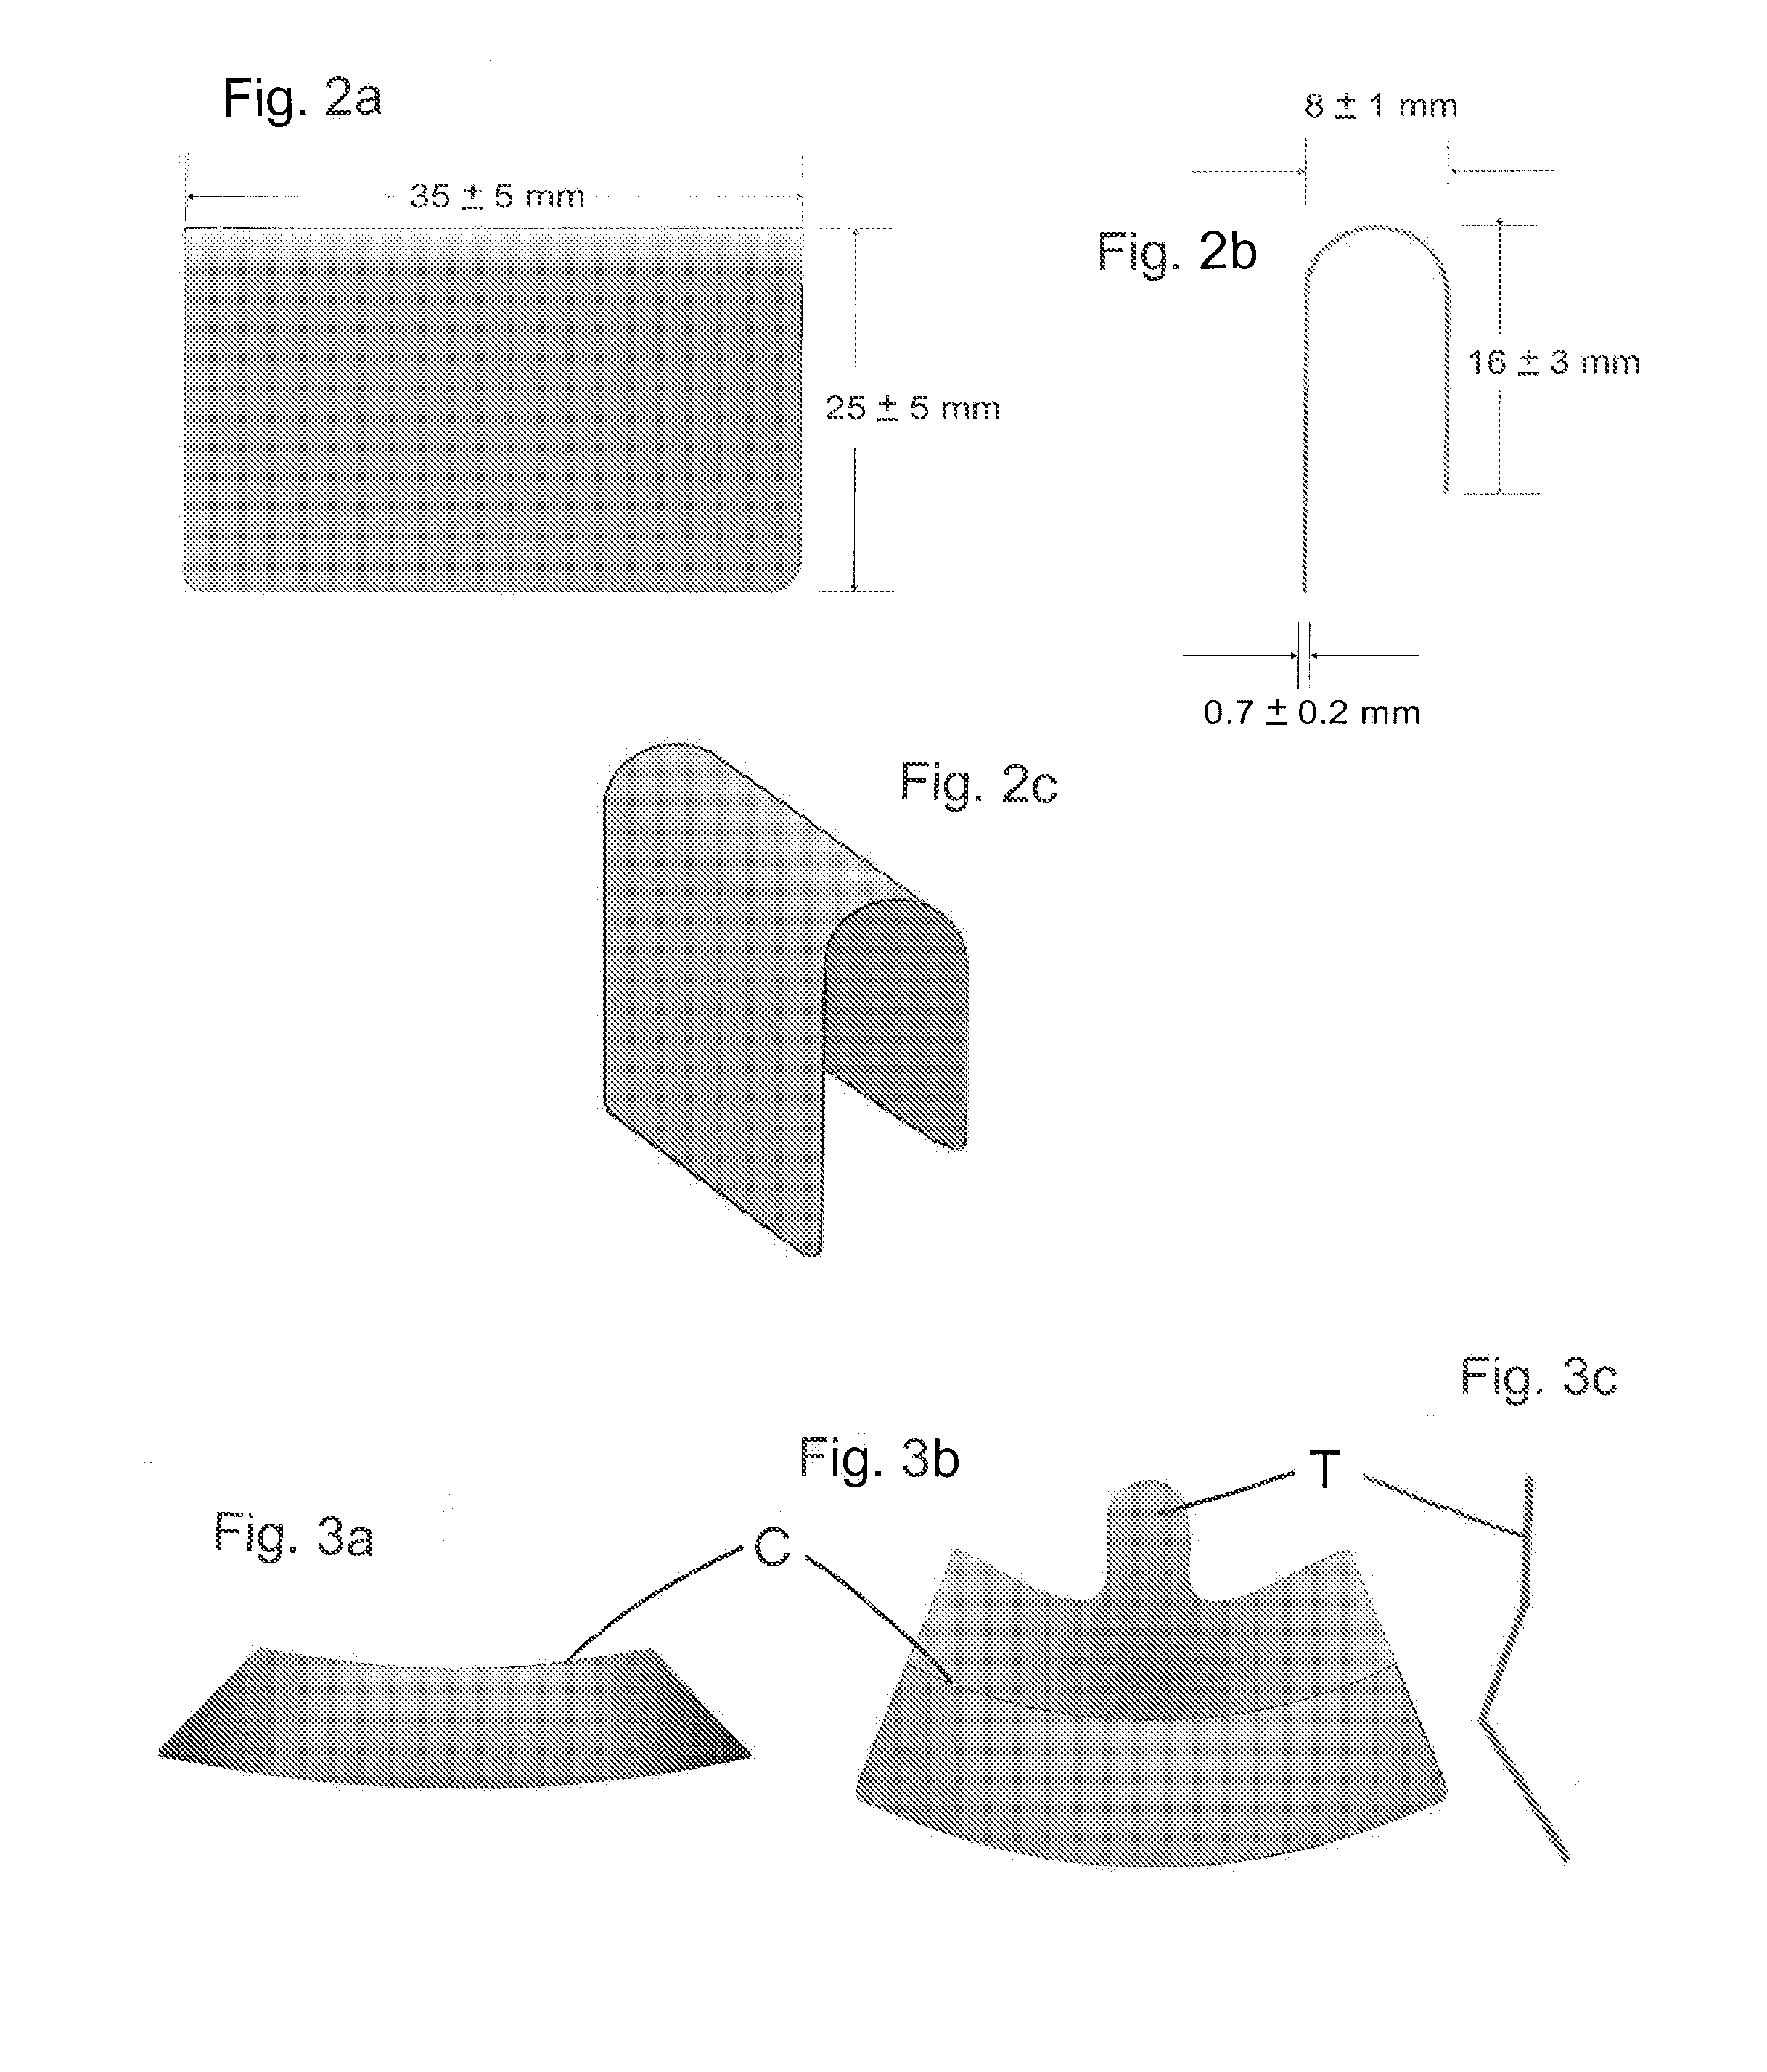 Self-Supporting Collagen Tunnel for Guided Tissue Regeneration and Method of Using Same